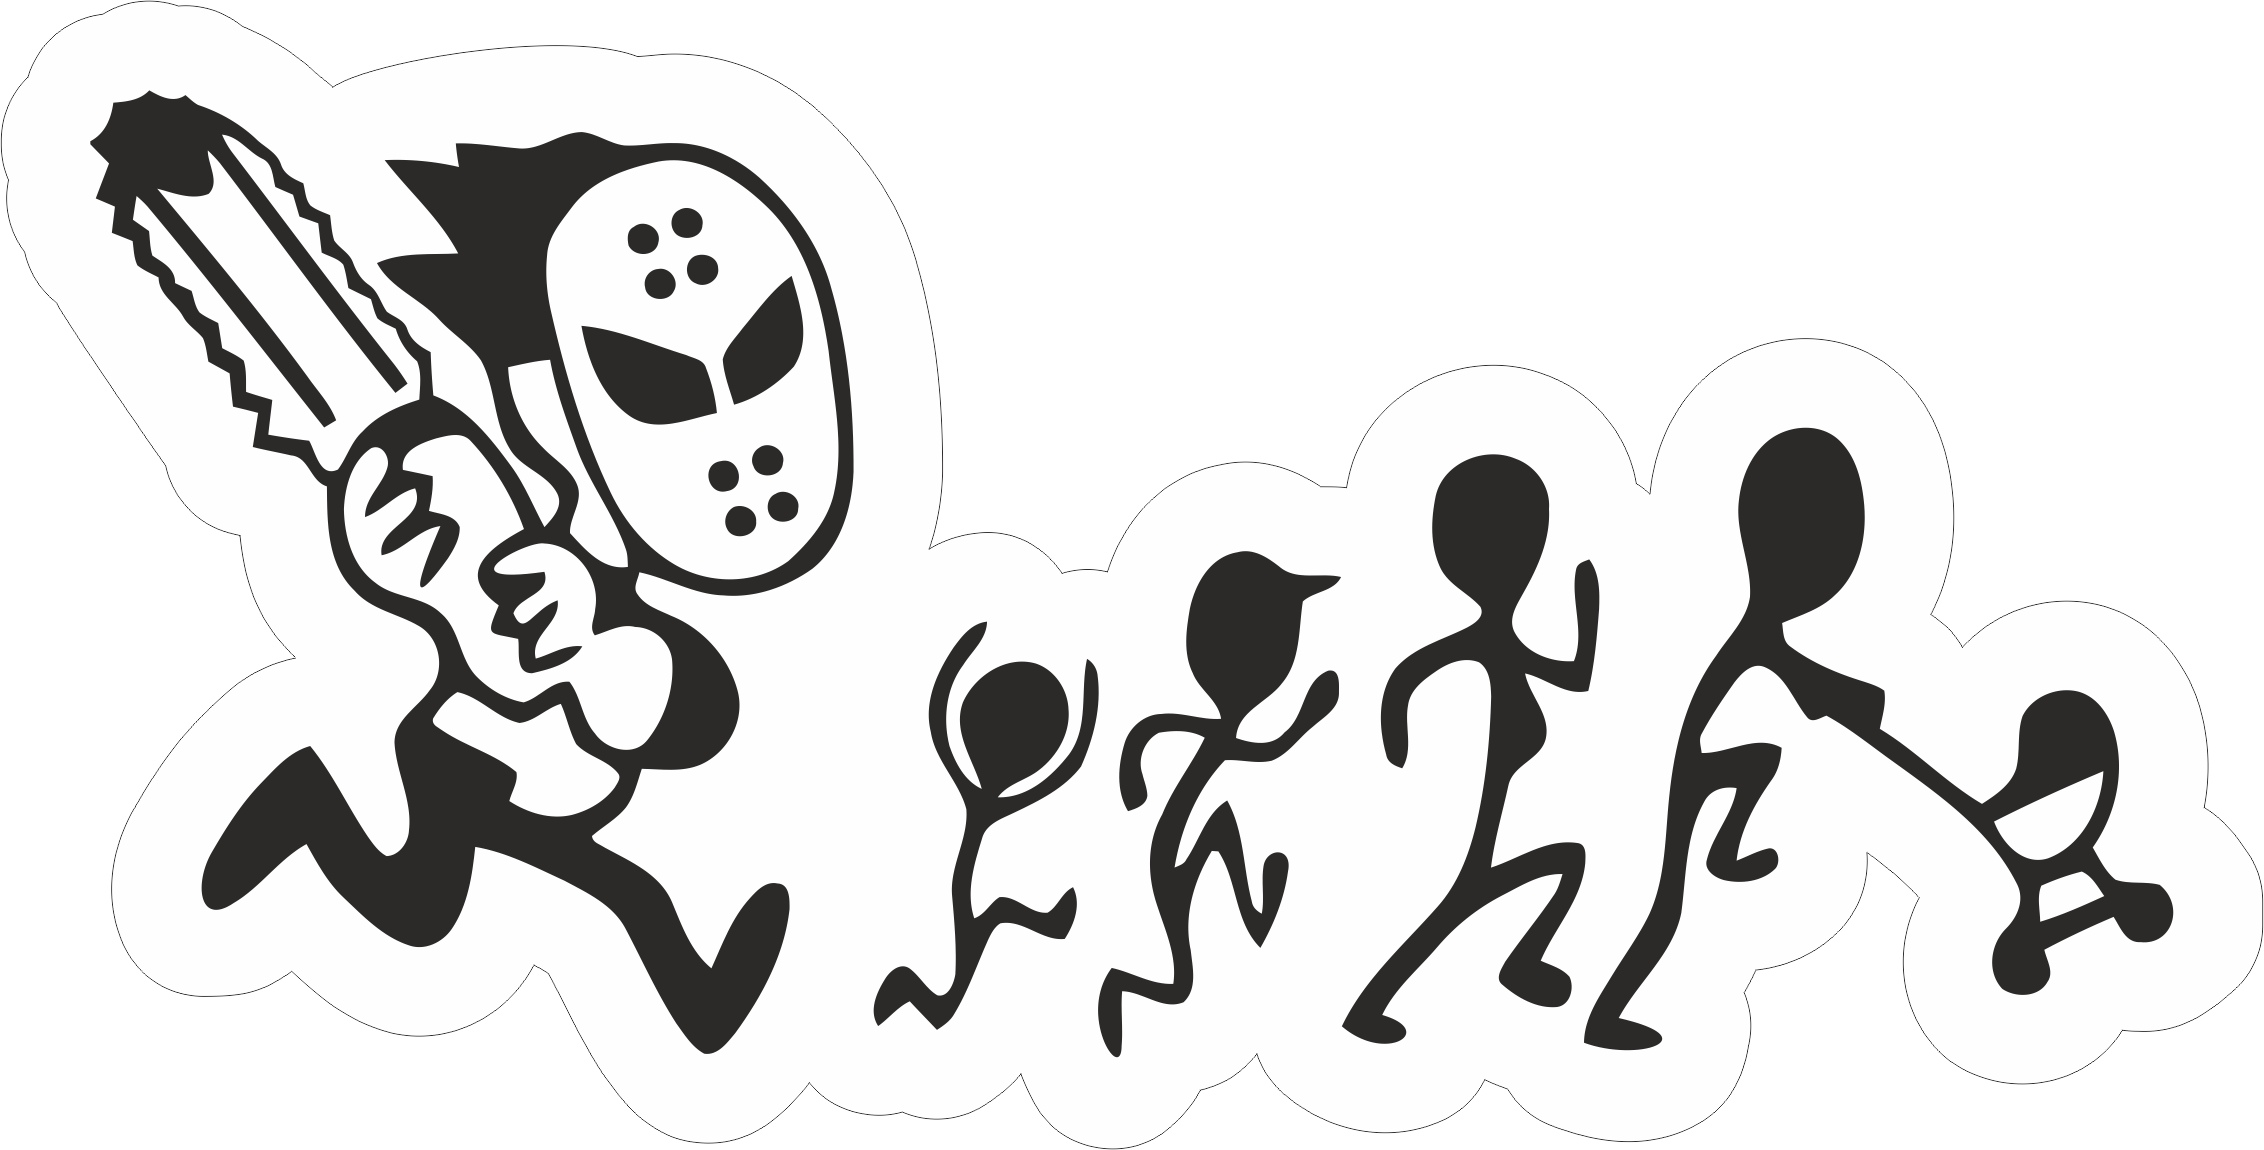 Family Car Sticker Free Vector cdr Download - 3axis.co